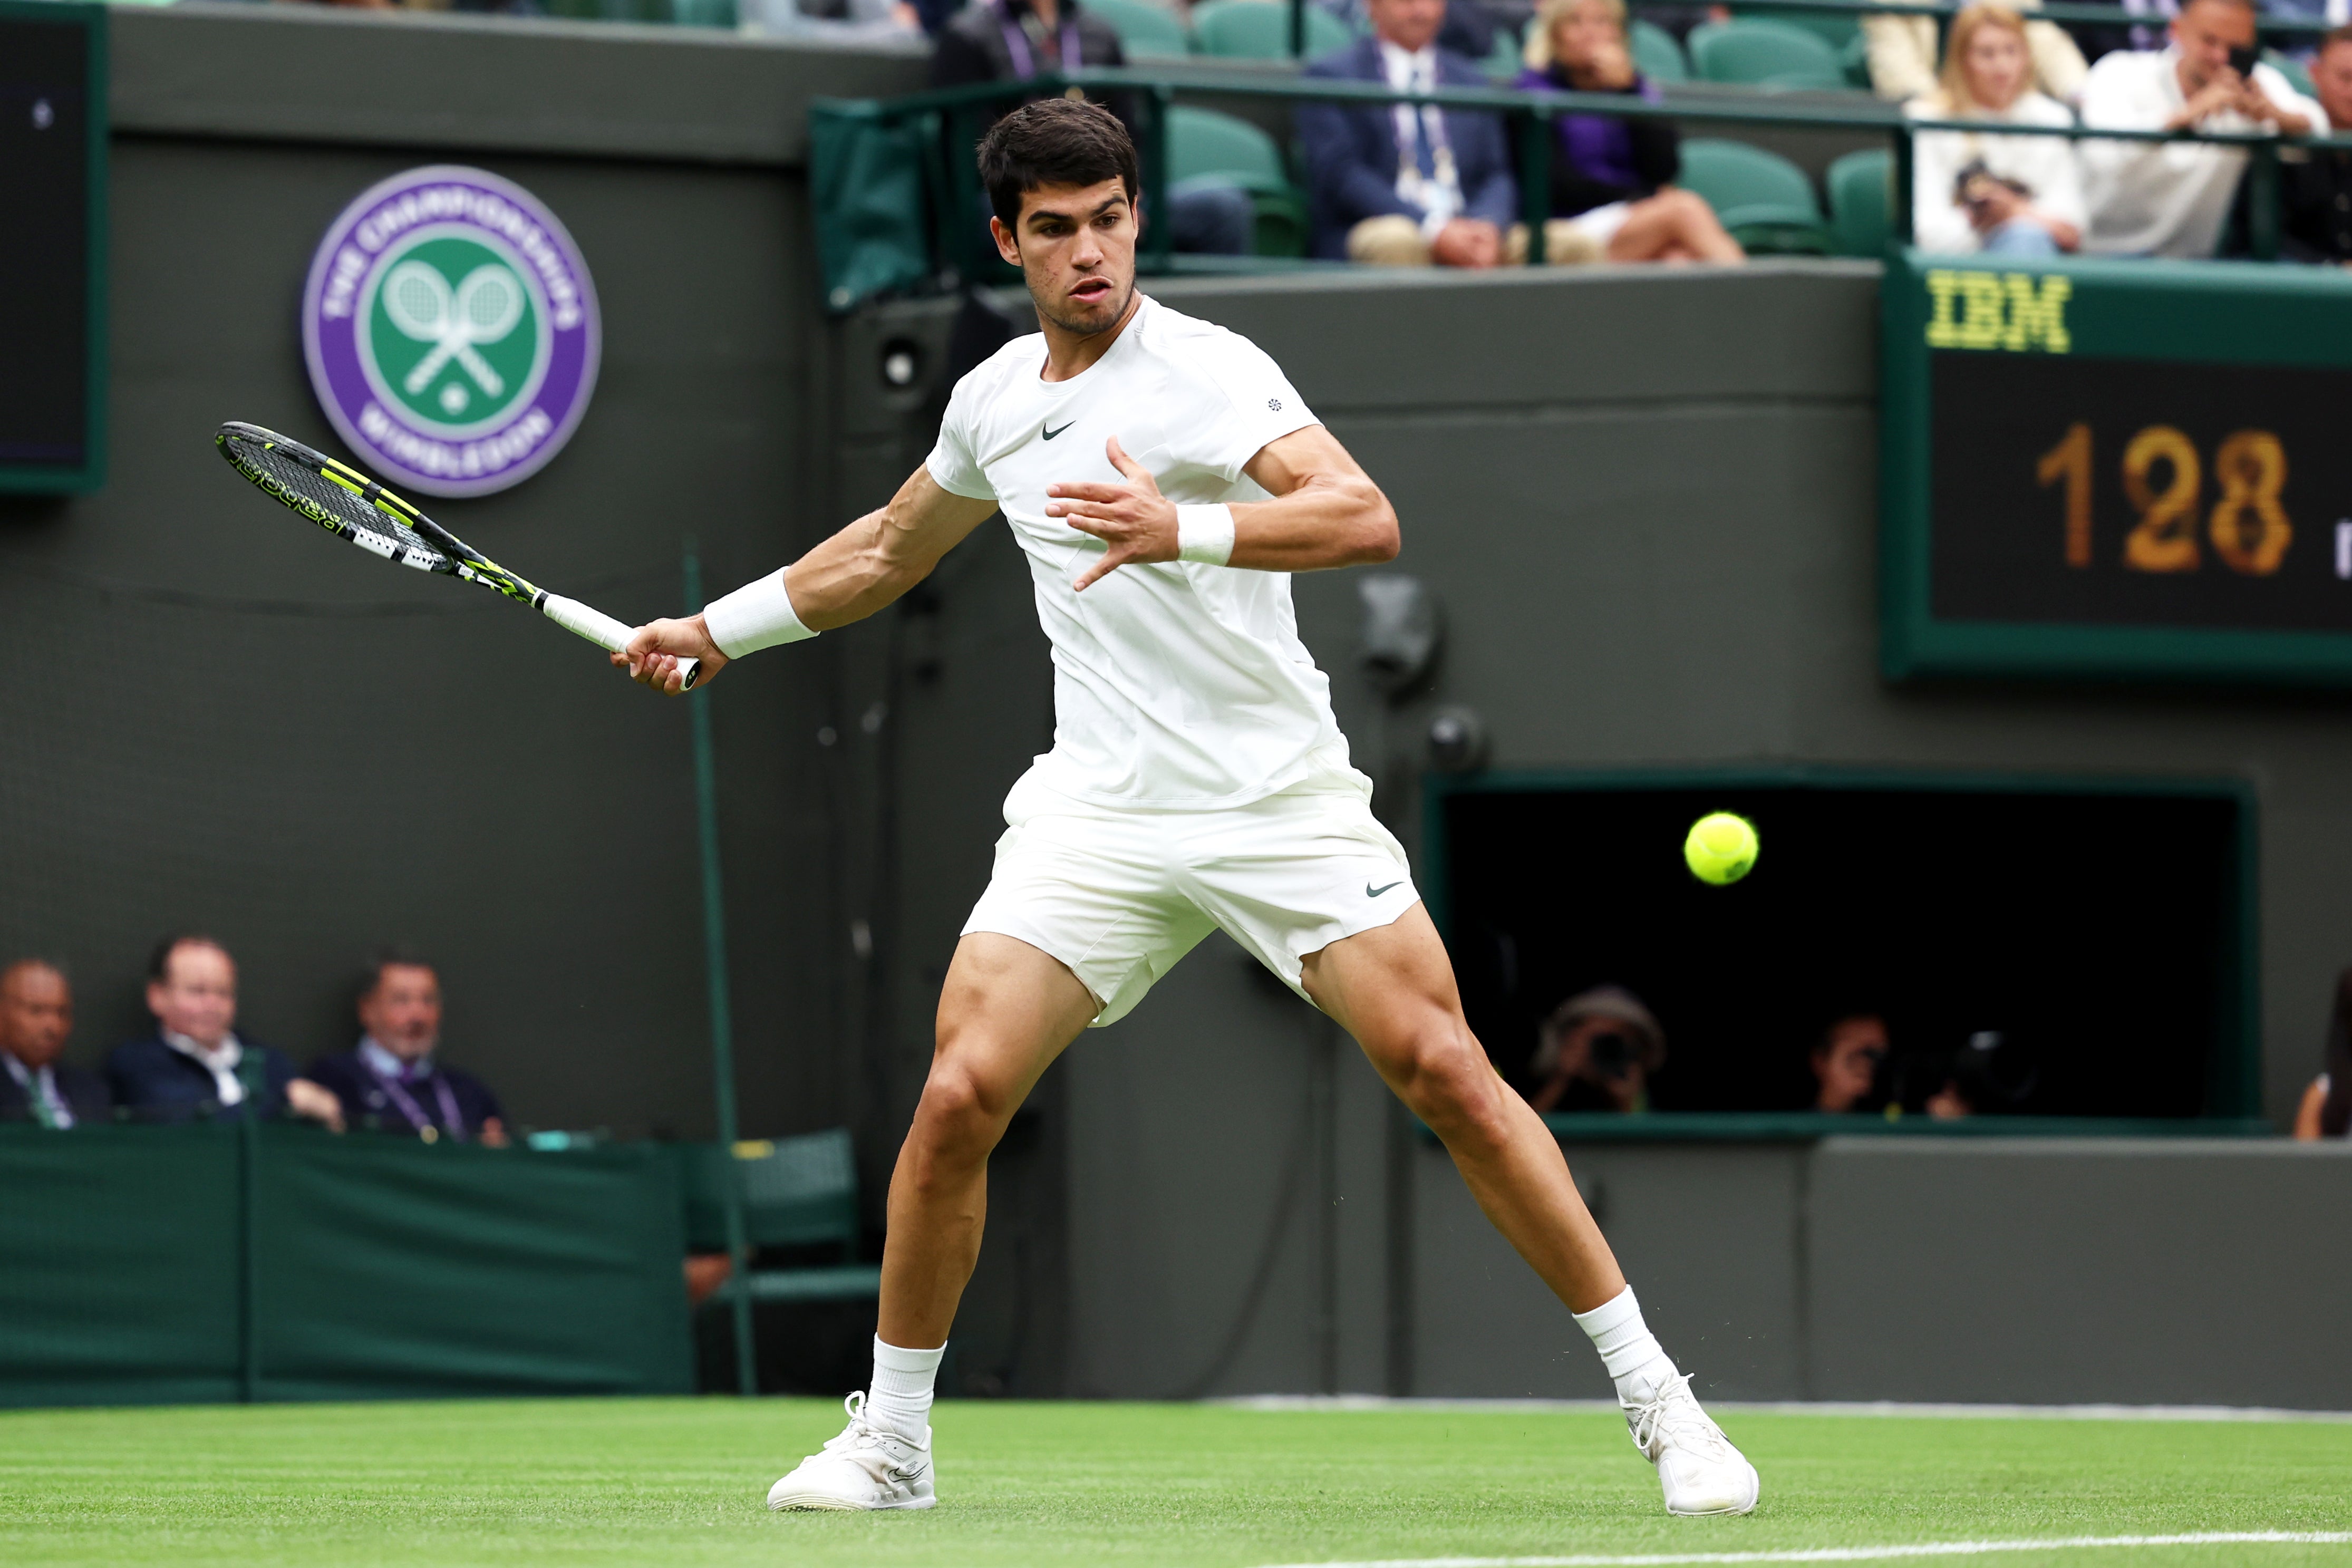 Carlos Alcaraz sealed his place in the second round of Wimbledon